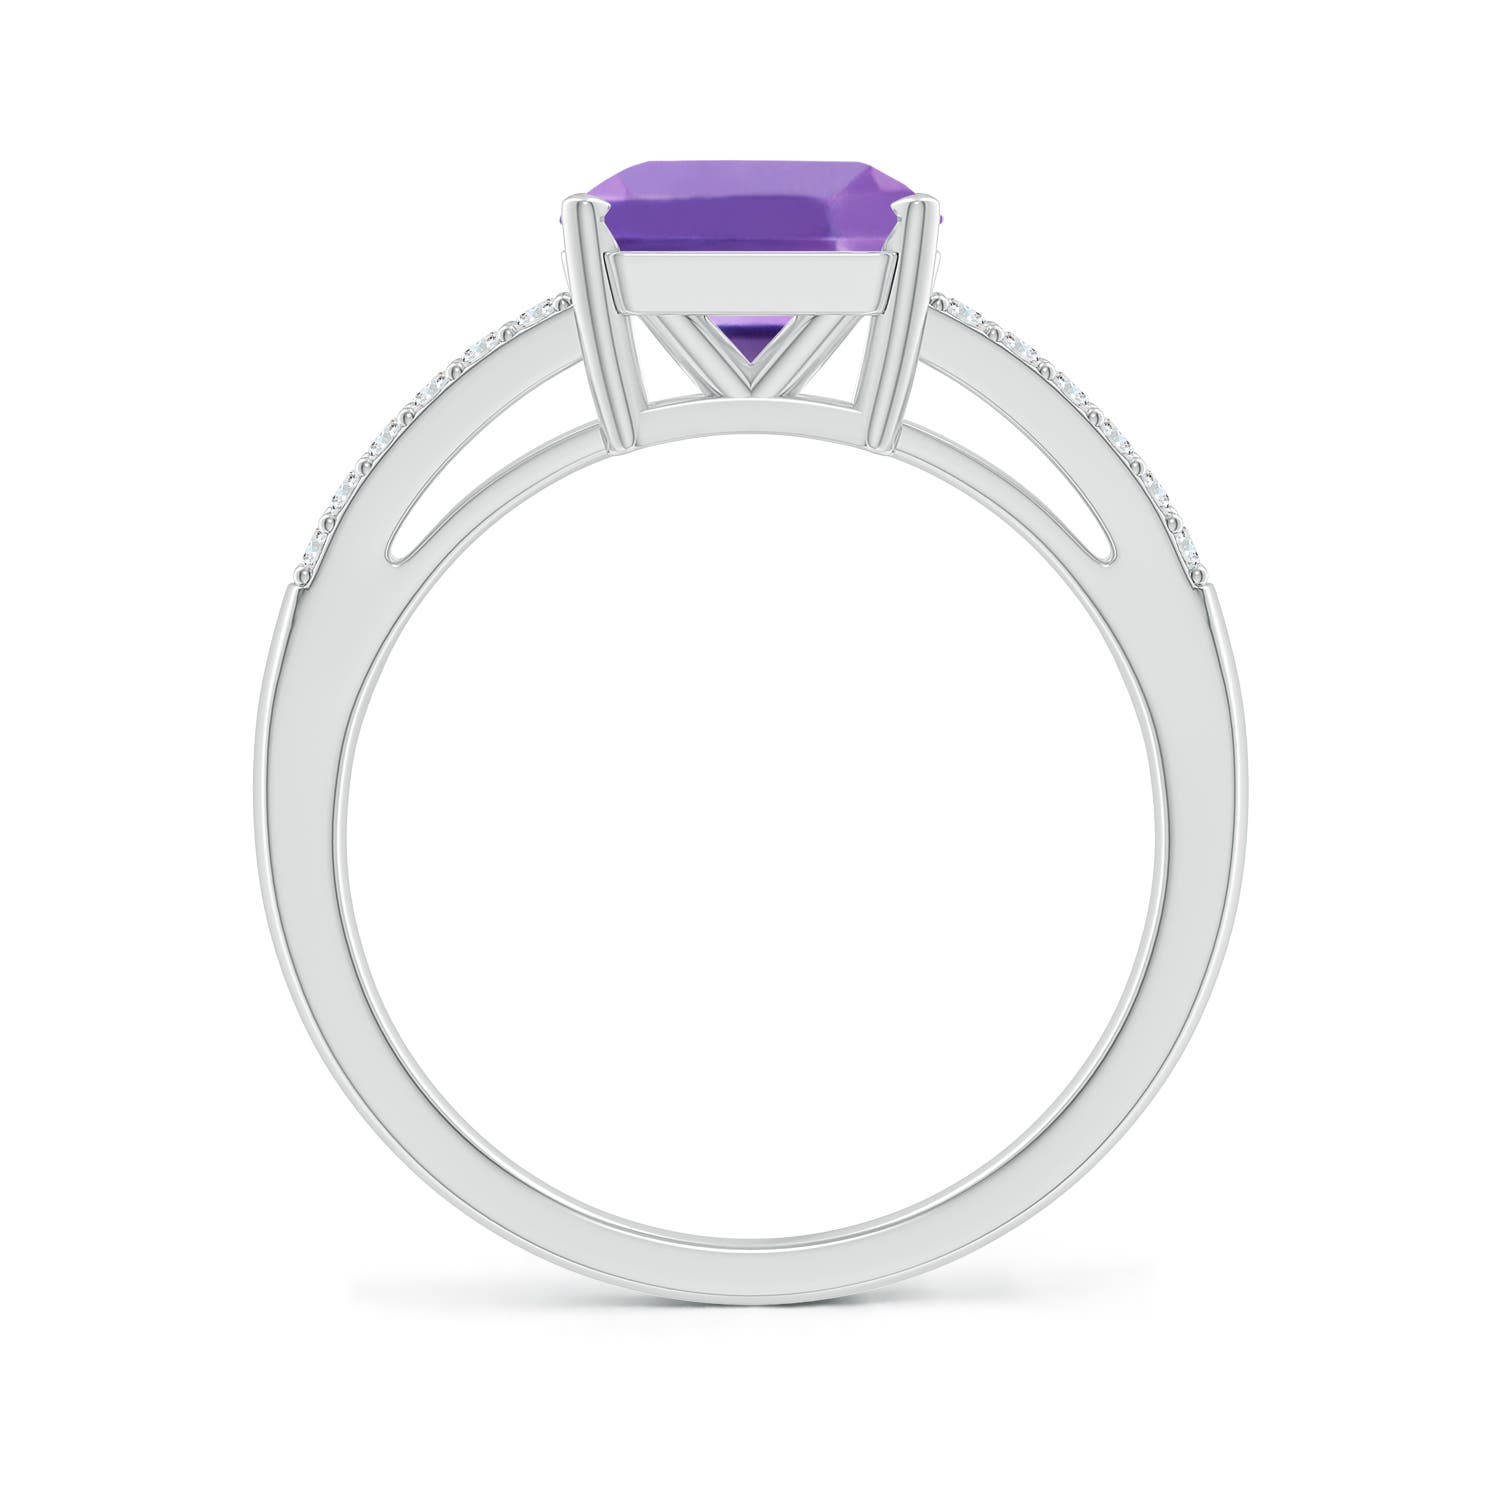 A - Amethyst / 2.24 CT / 14 KT White Gold